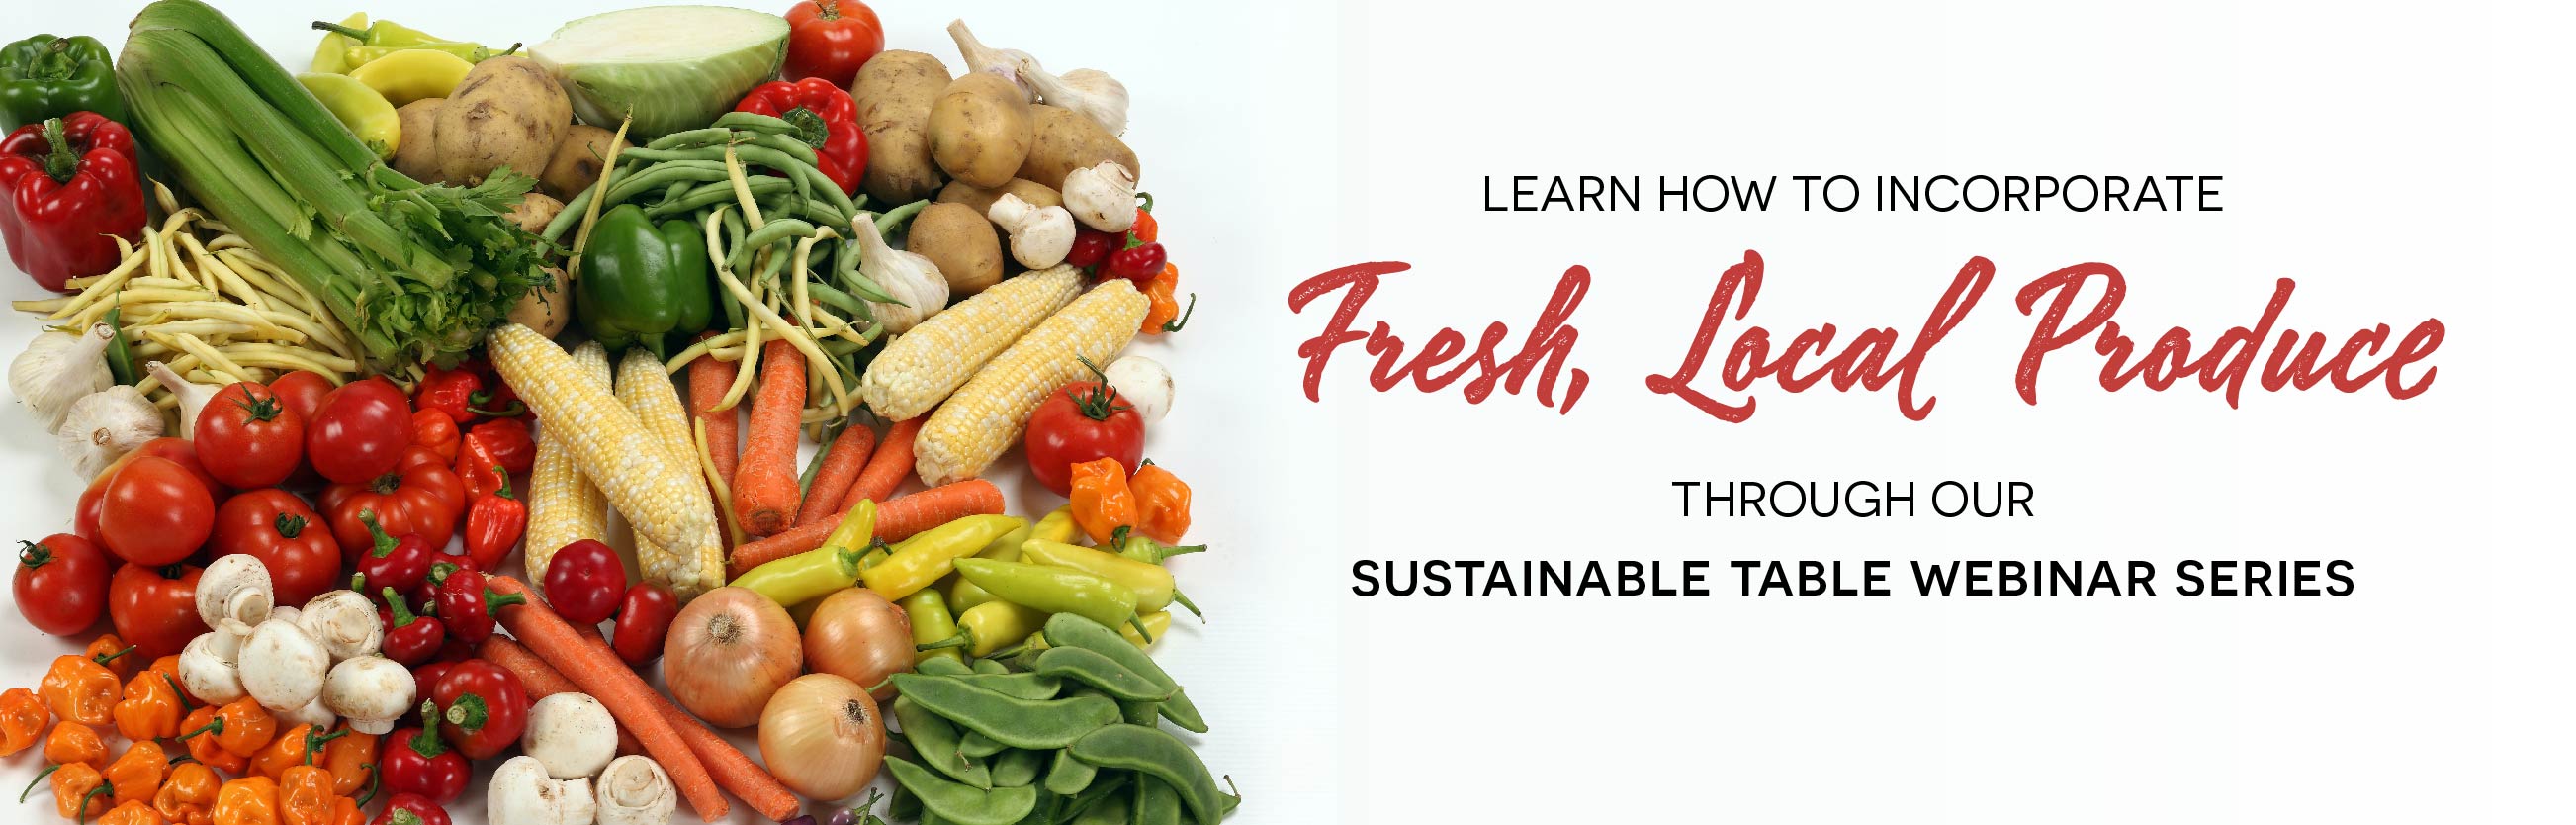 Learn how to incorporate fresh, local produce through our sustainable table webinar series.